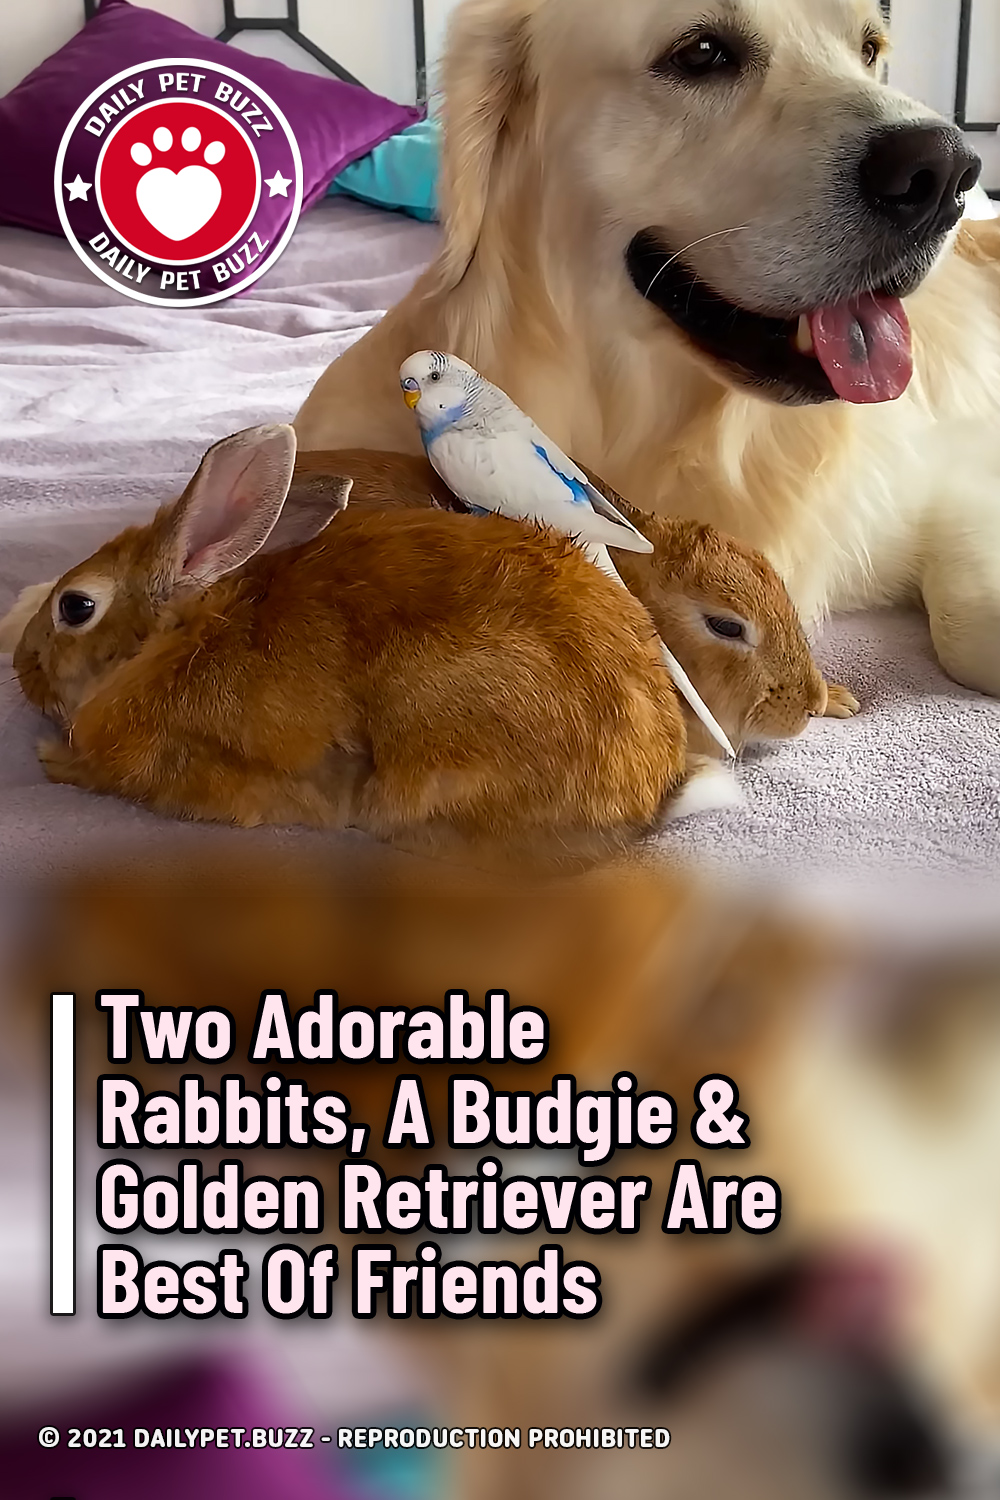 Two Adorable Rabbits, A Budgie & Golden Retriever Are Best Of Friends